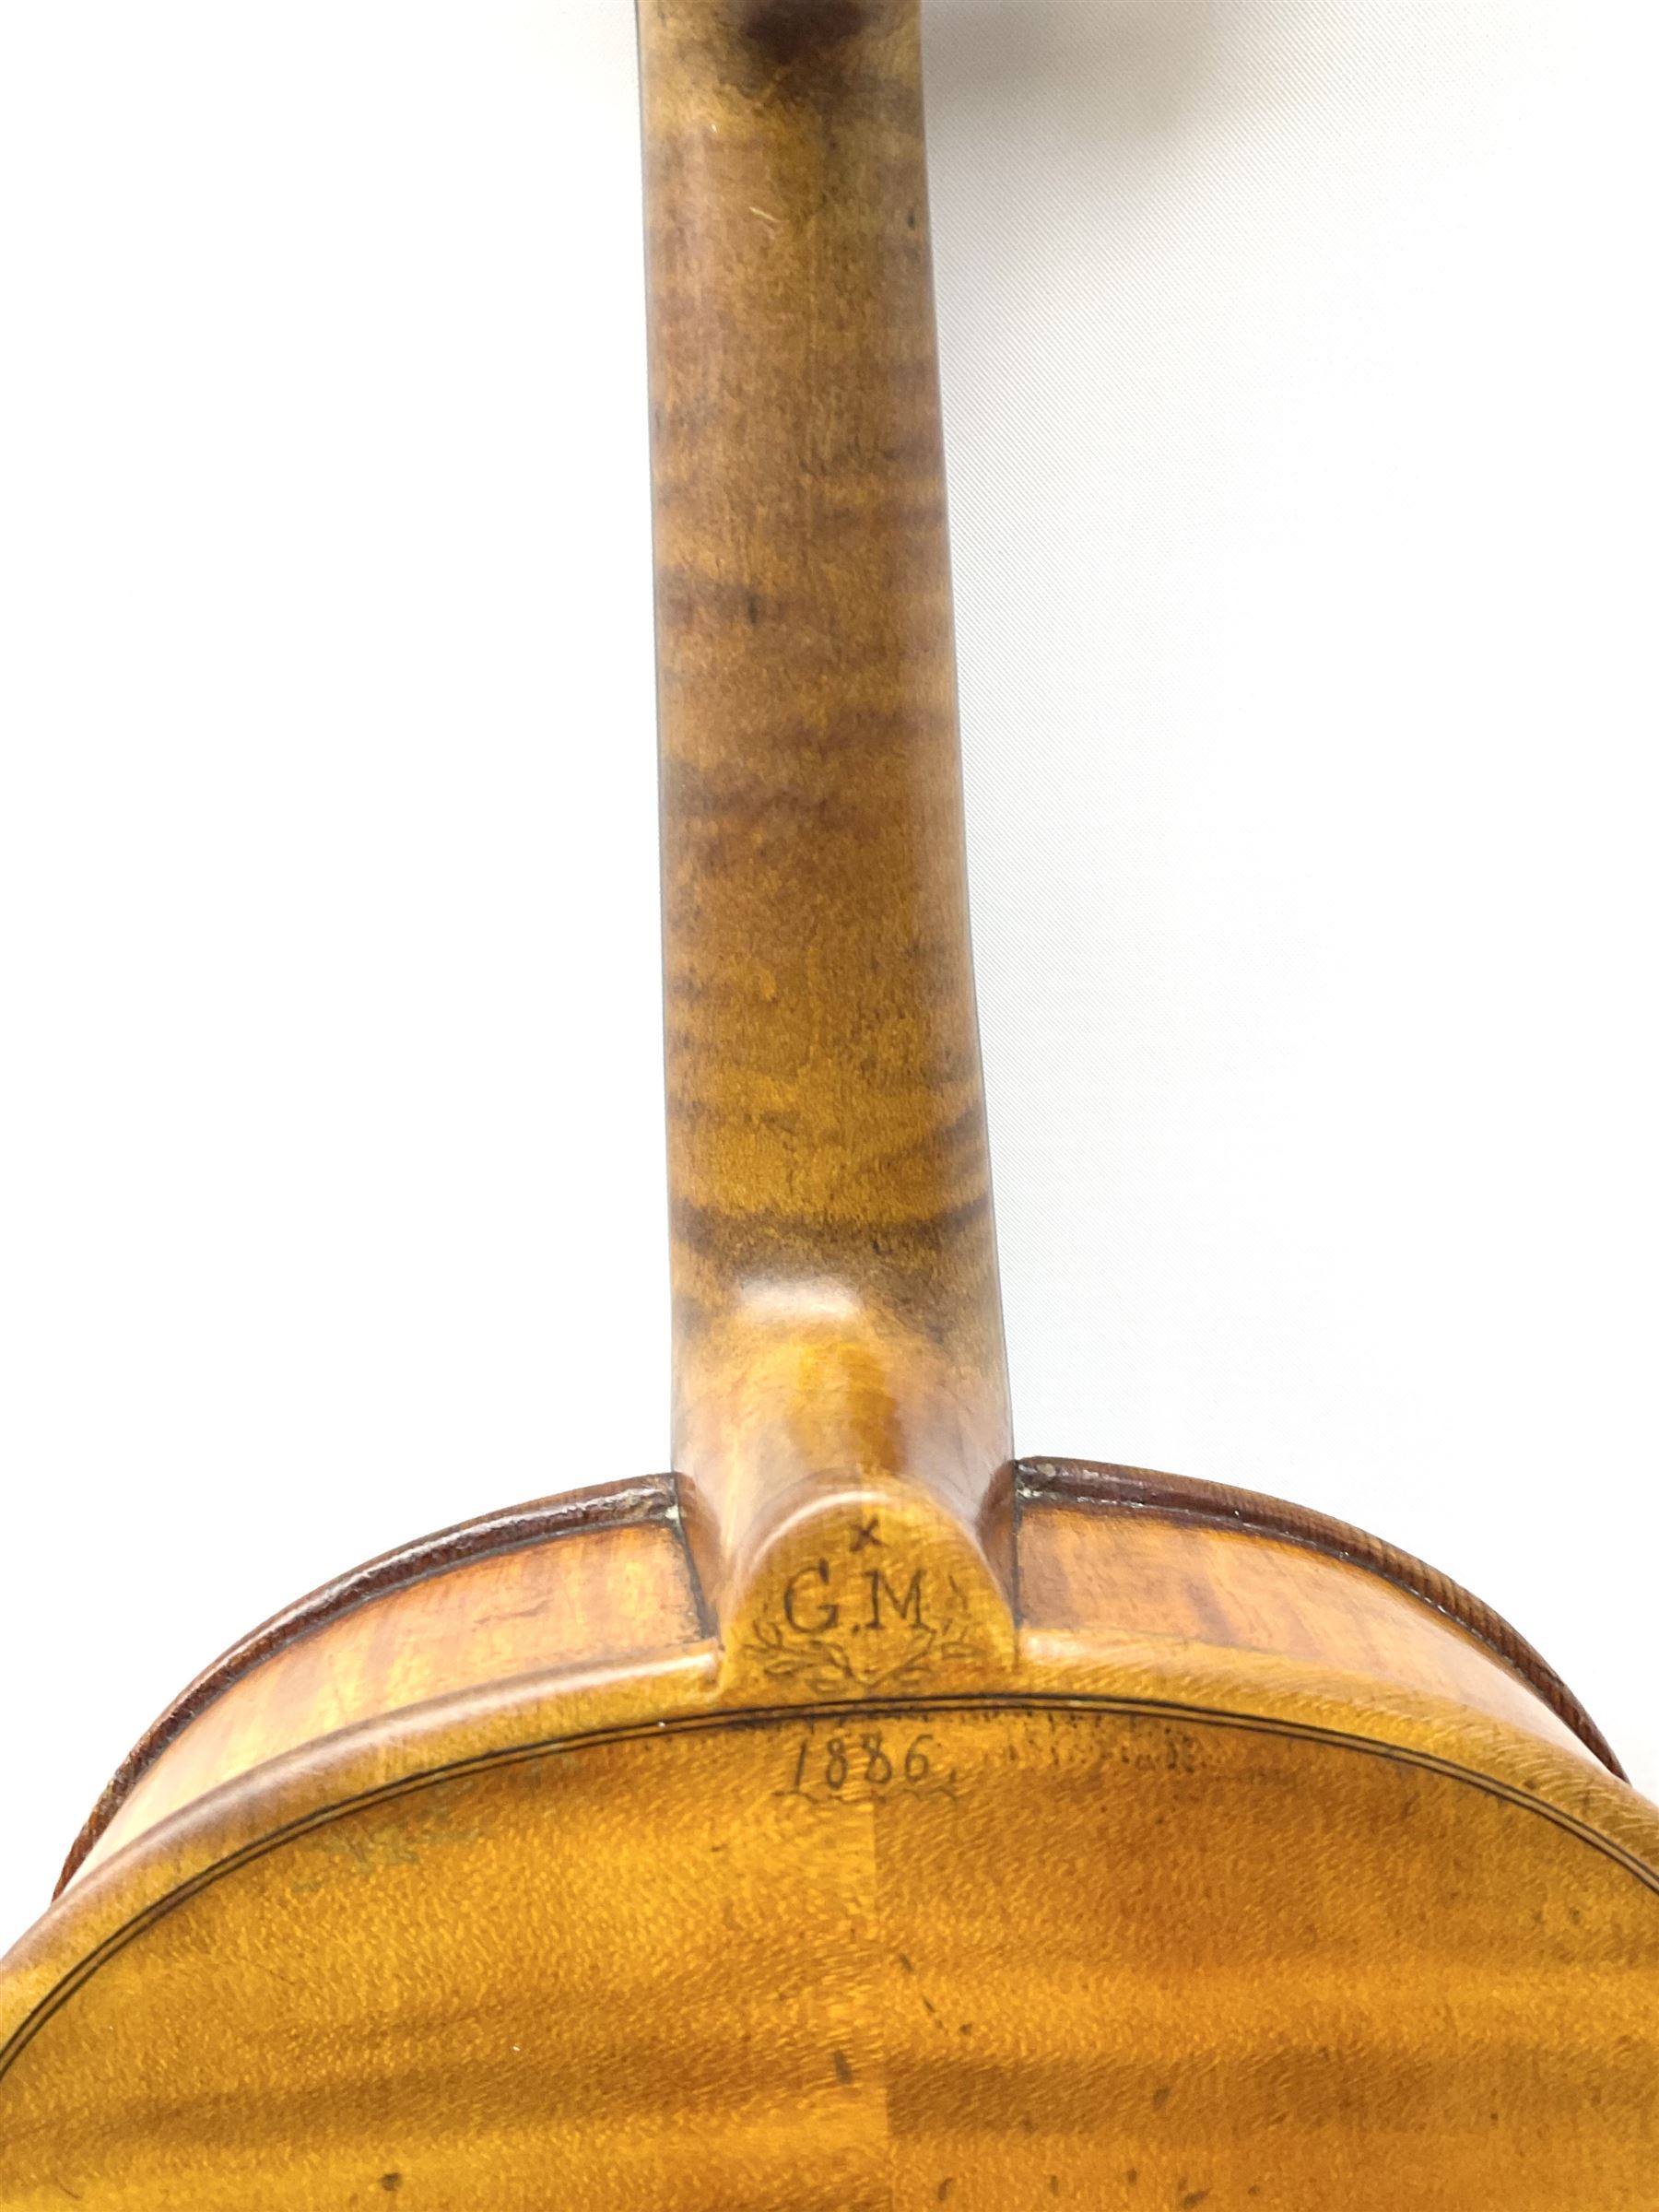 German viola c1900 with 38.5cm (15.25") two-piece maple back and ribs and spruce top - Image 11 of 21